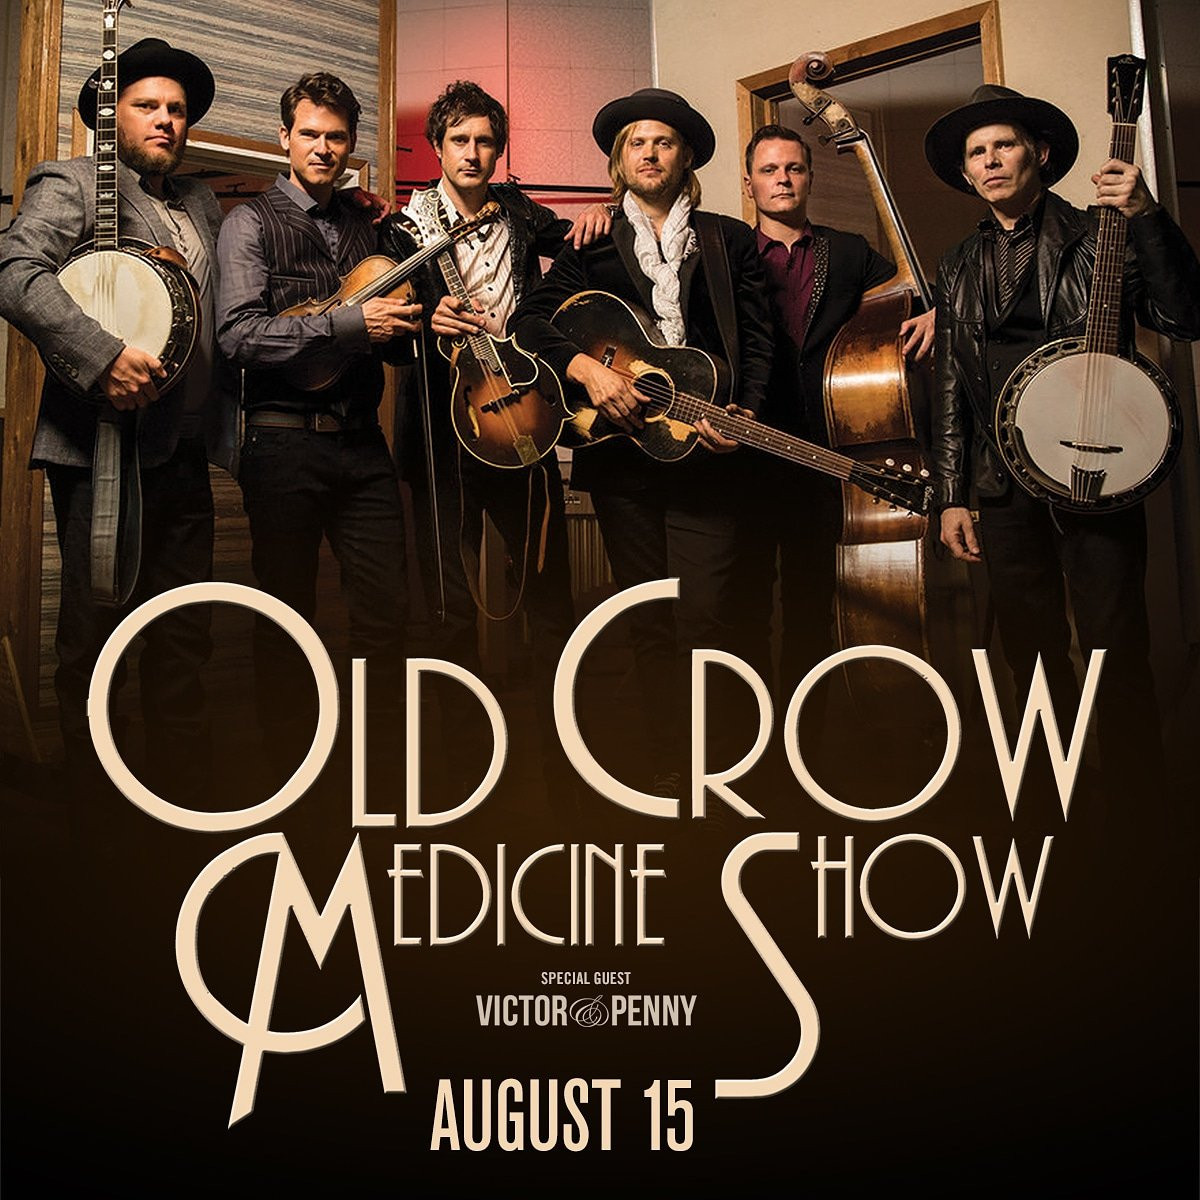 Old crow medicine show tour posters